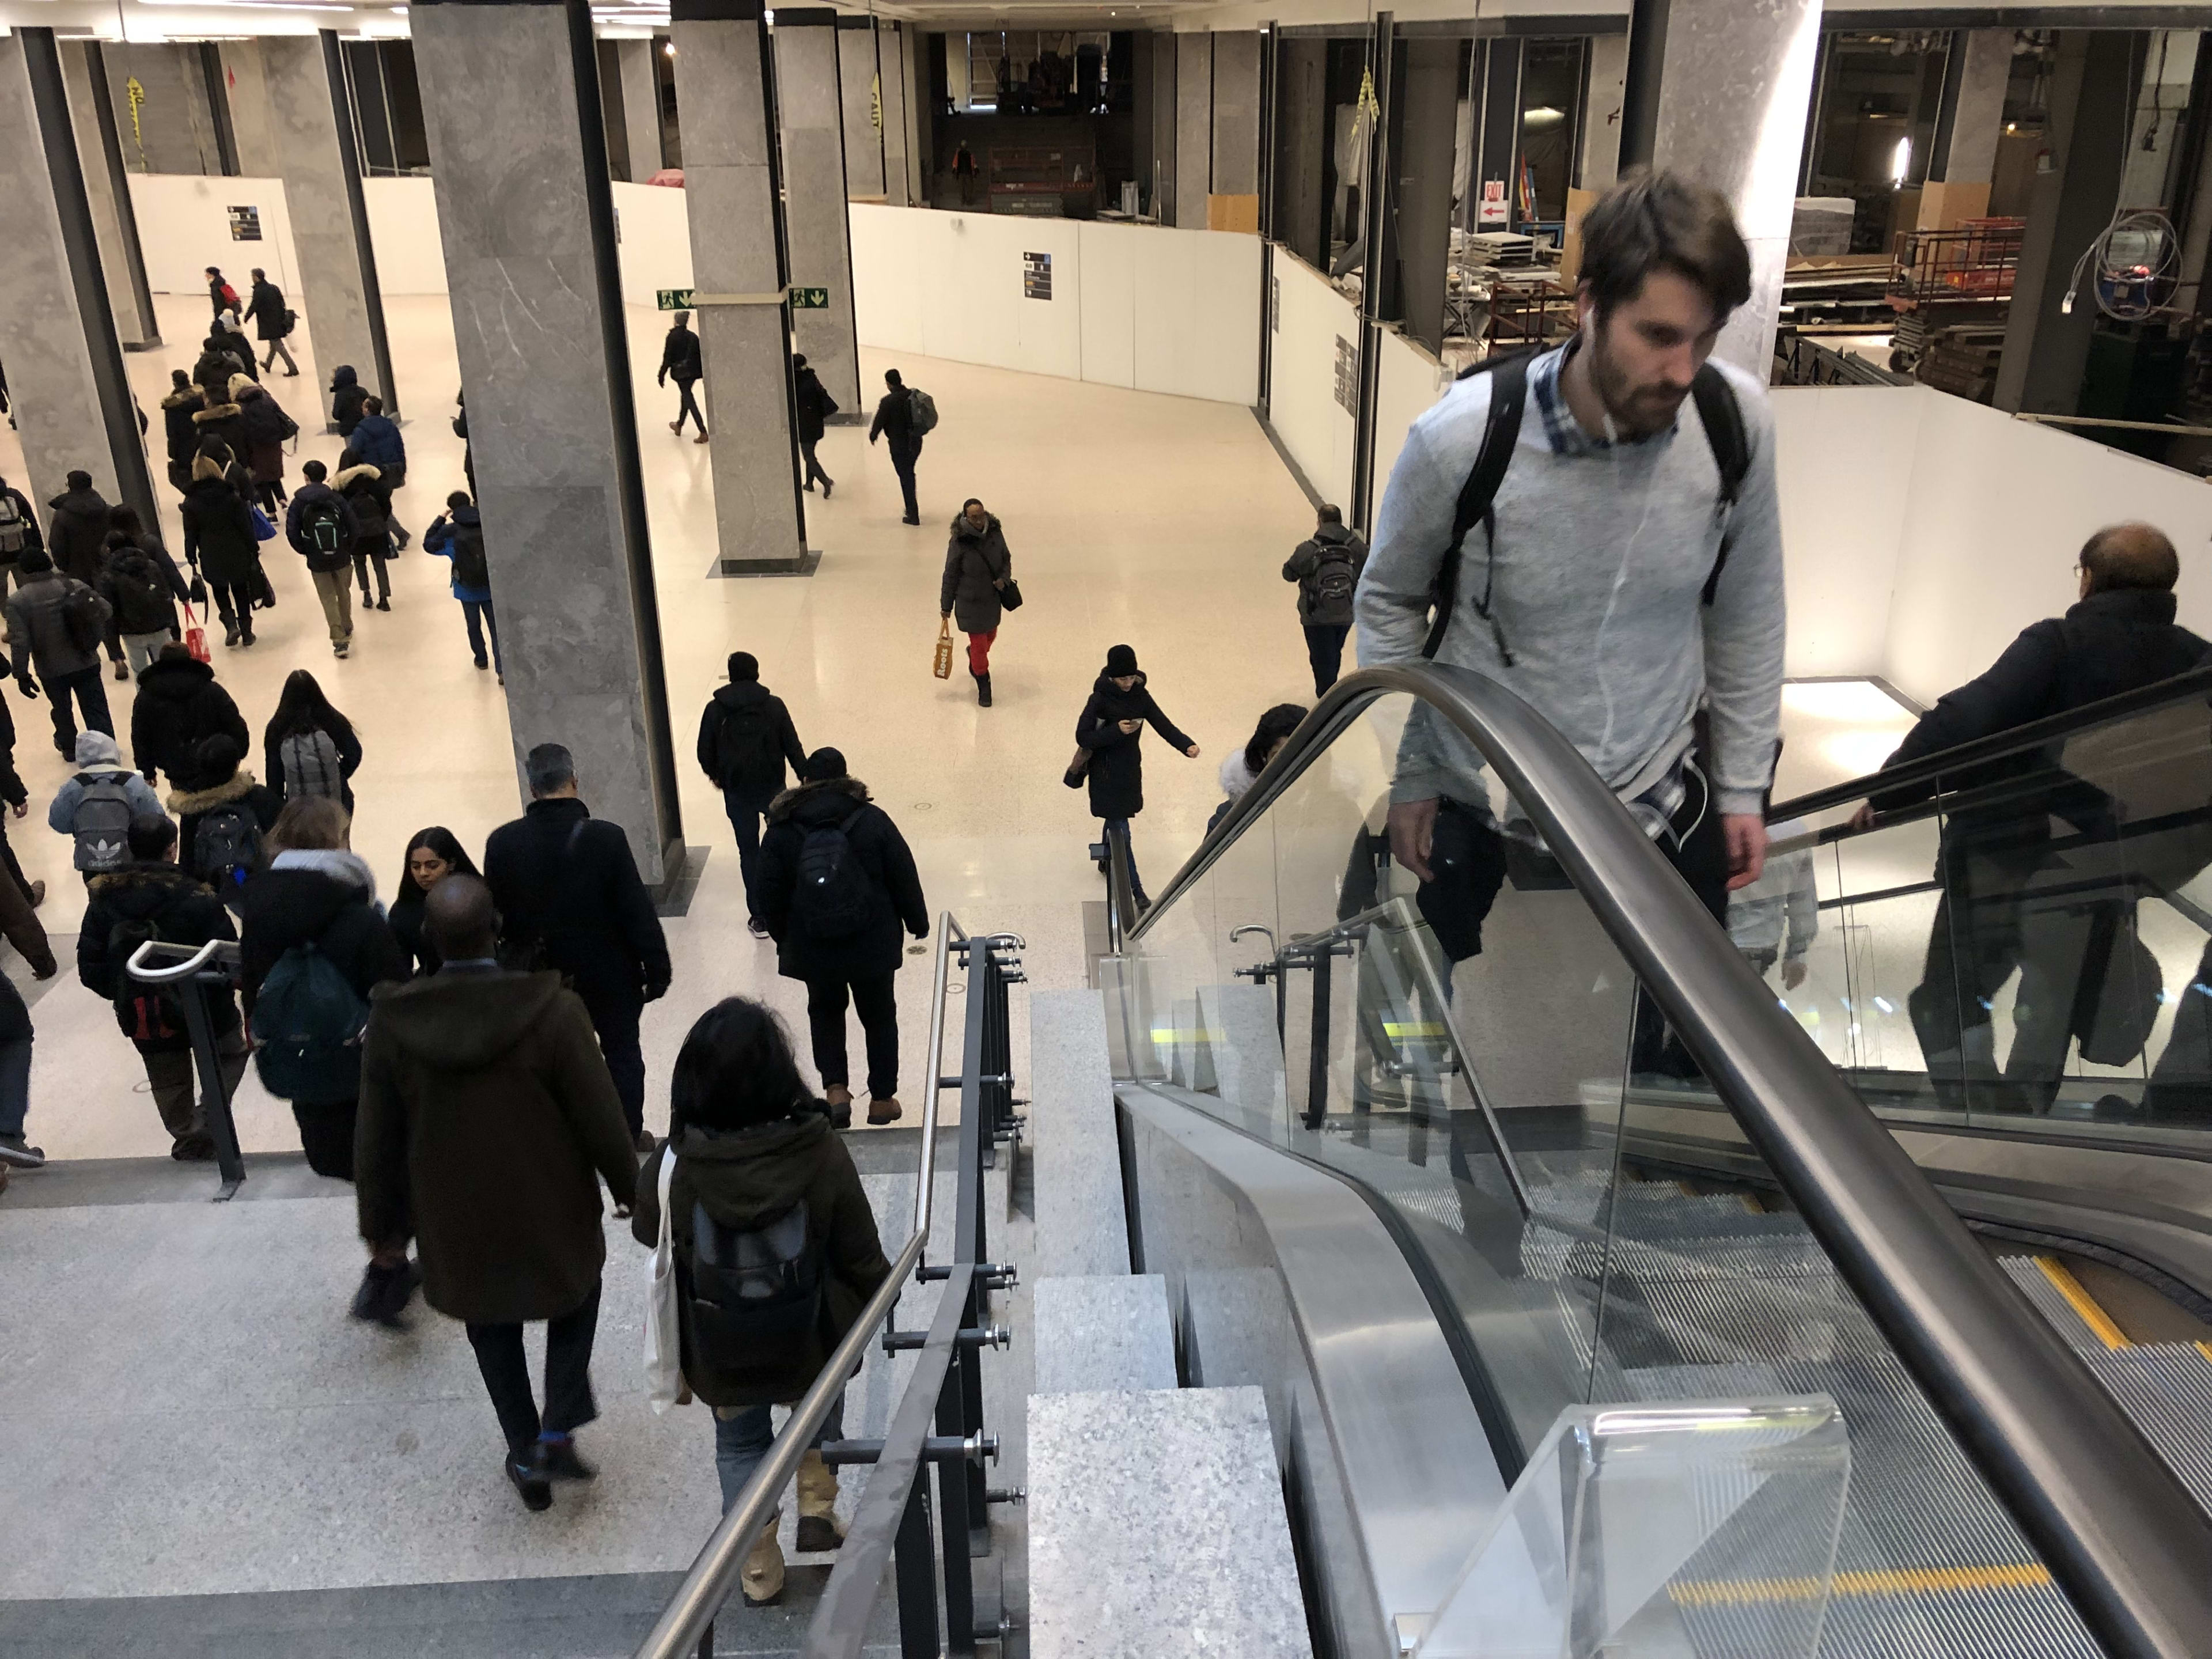 Travellers go down the stairs and up the escalators.